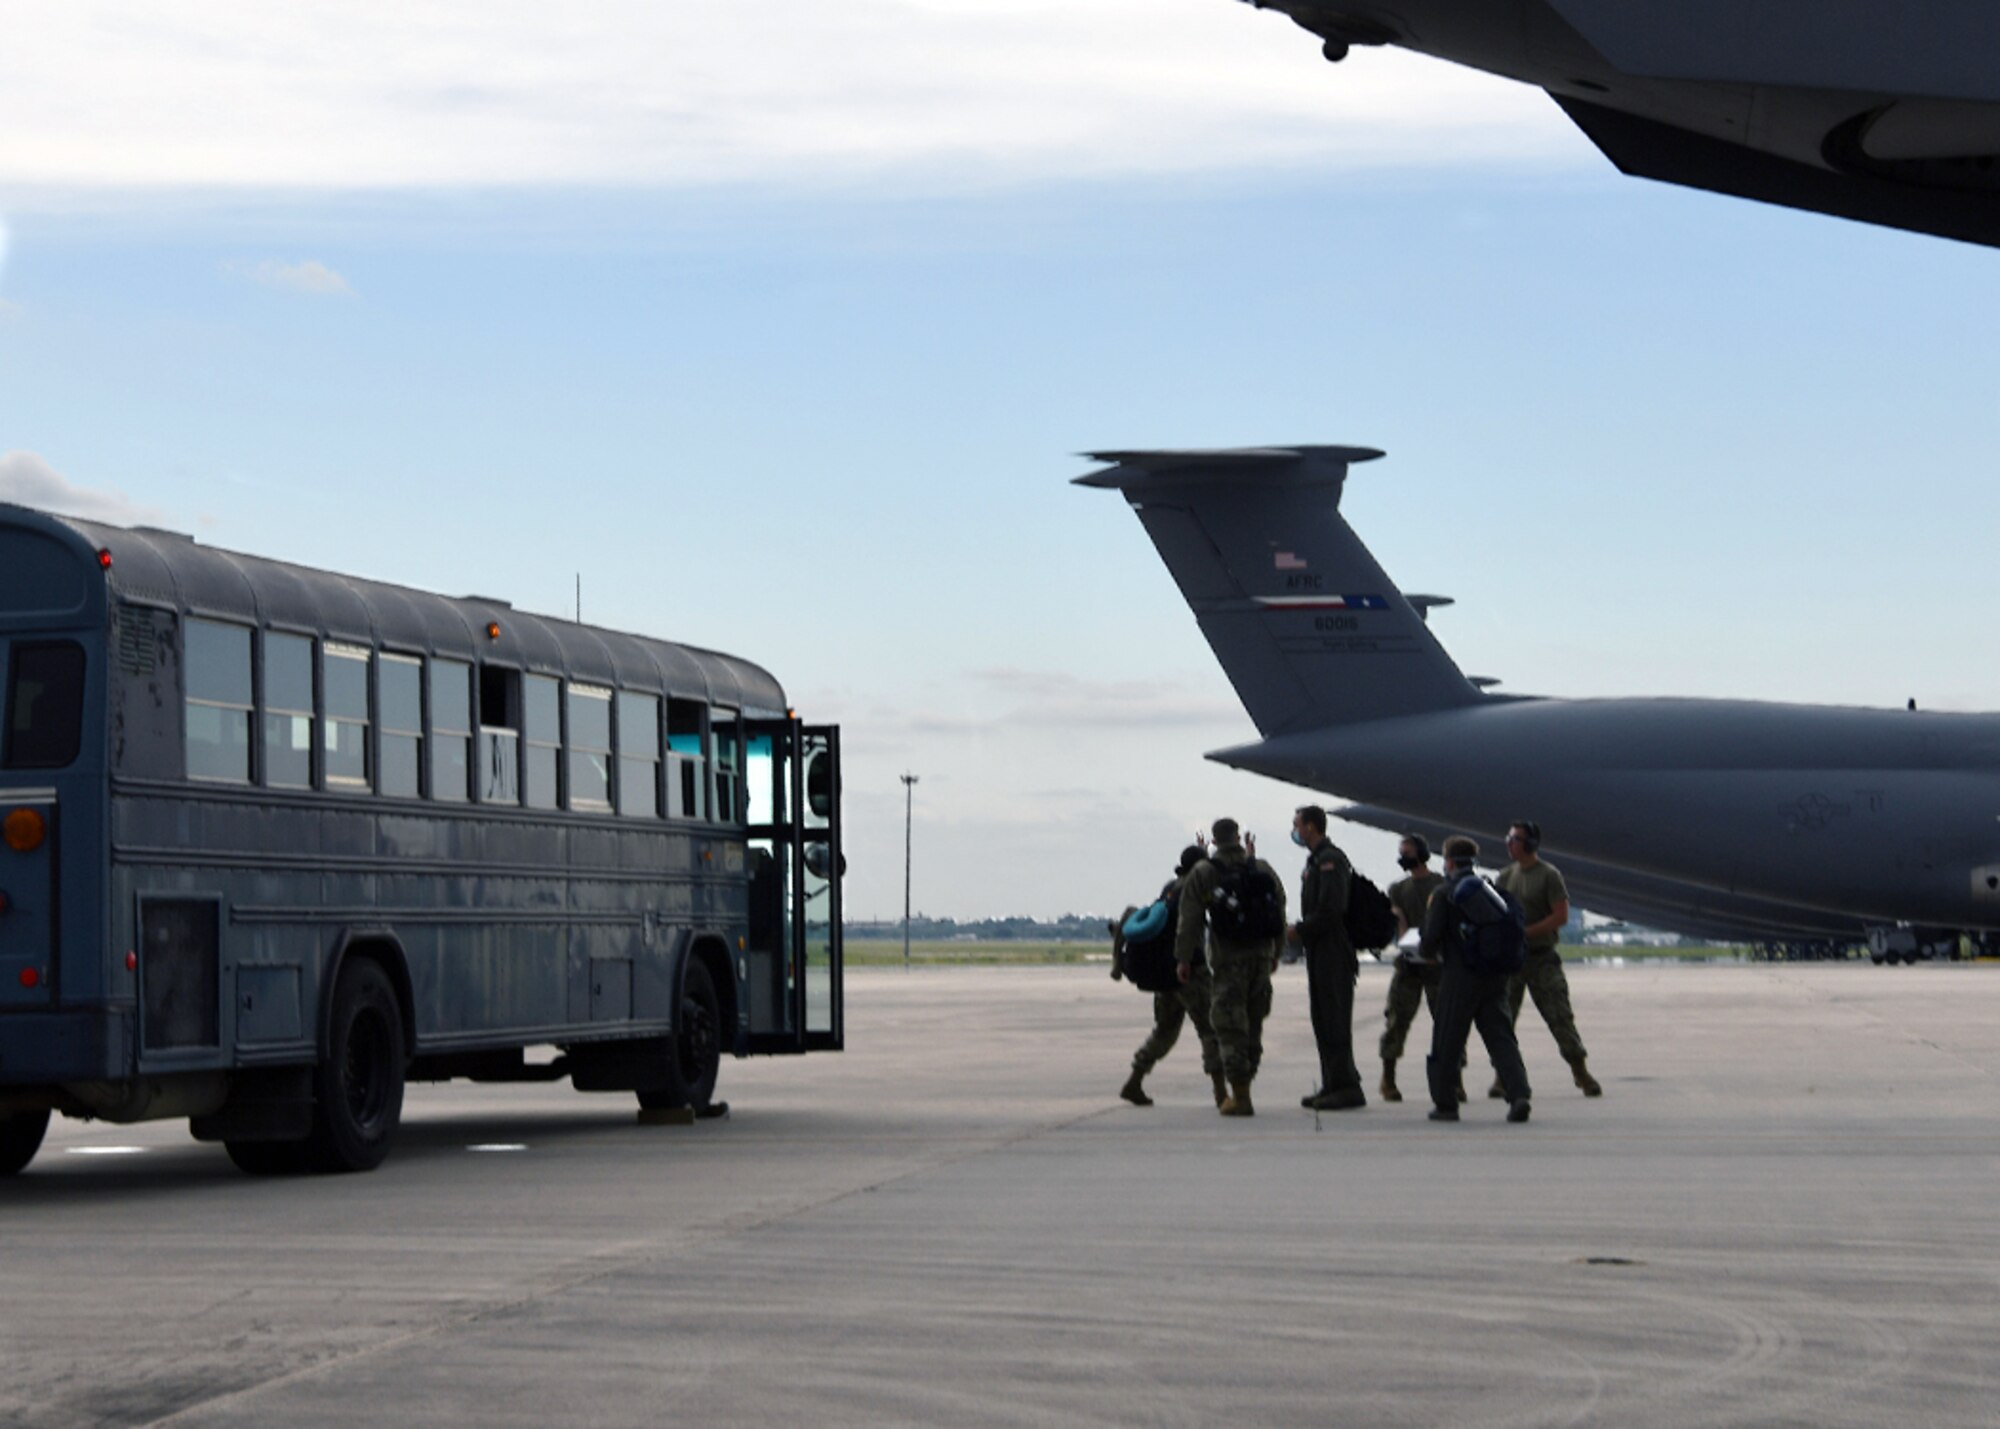 Reserve Citizen Airmen from the 433rd Medical Group celebrate after returning home from a deployment to New York City, May 28, 2020 at Joint Base San Antonio-Lackland, Texas.